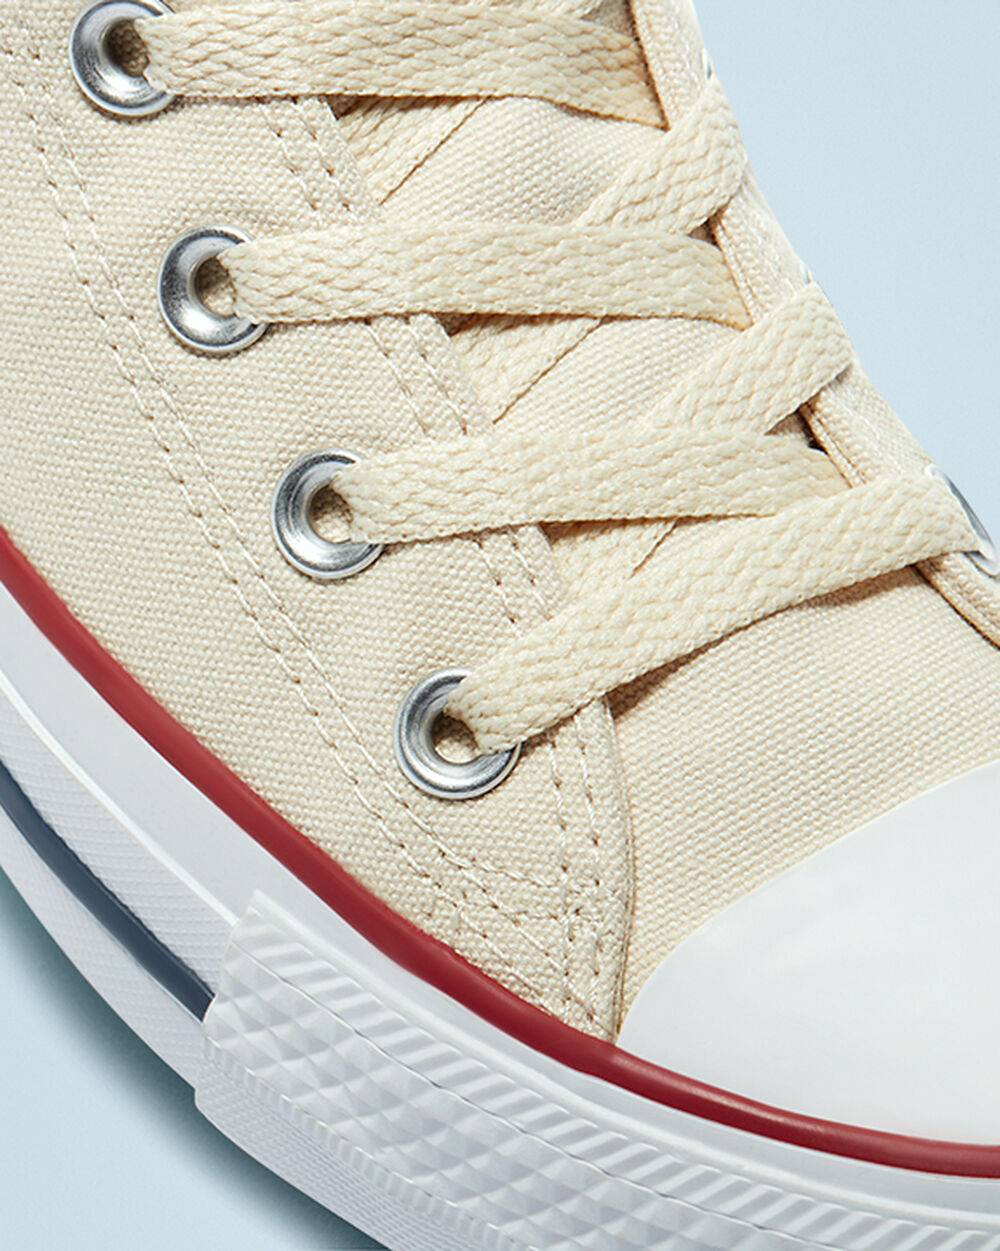 Tenis Converse Chuck Taylor All Star Mujer Beige Blancos | Mexico-834256